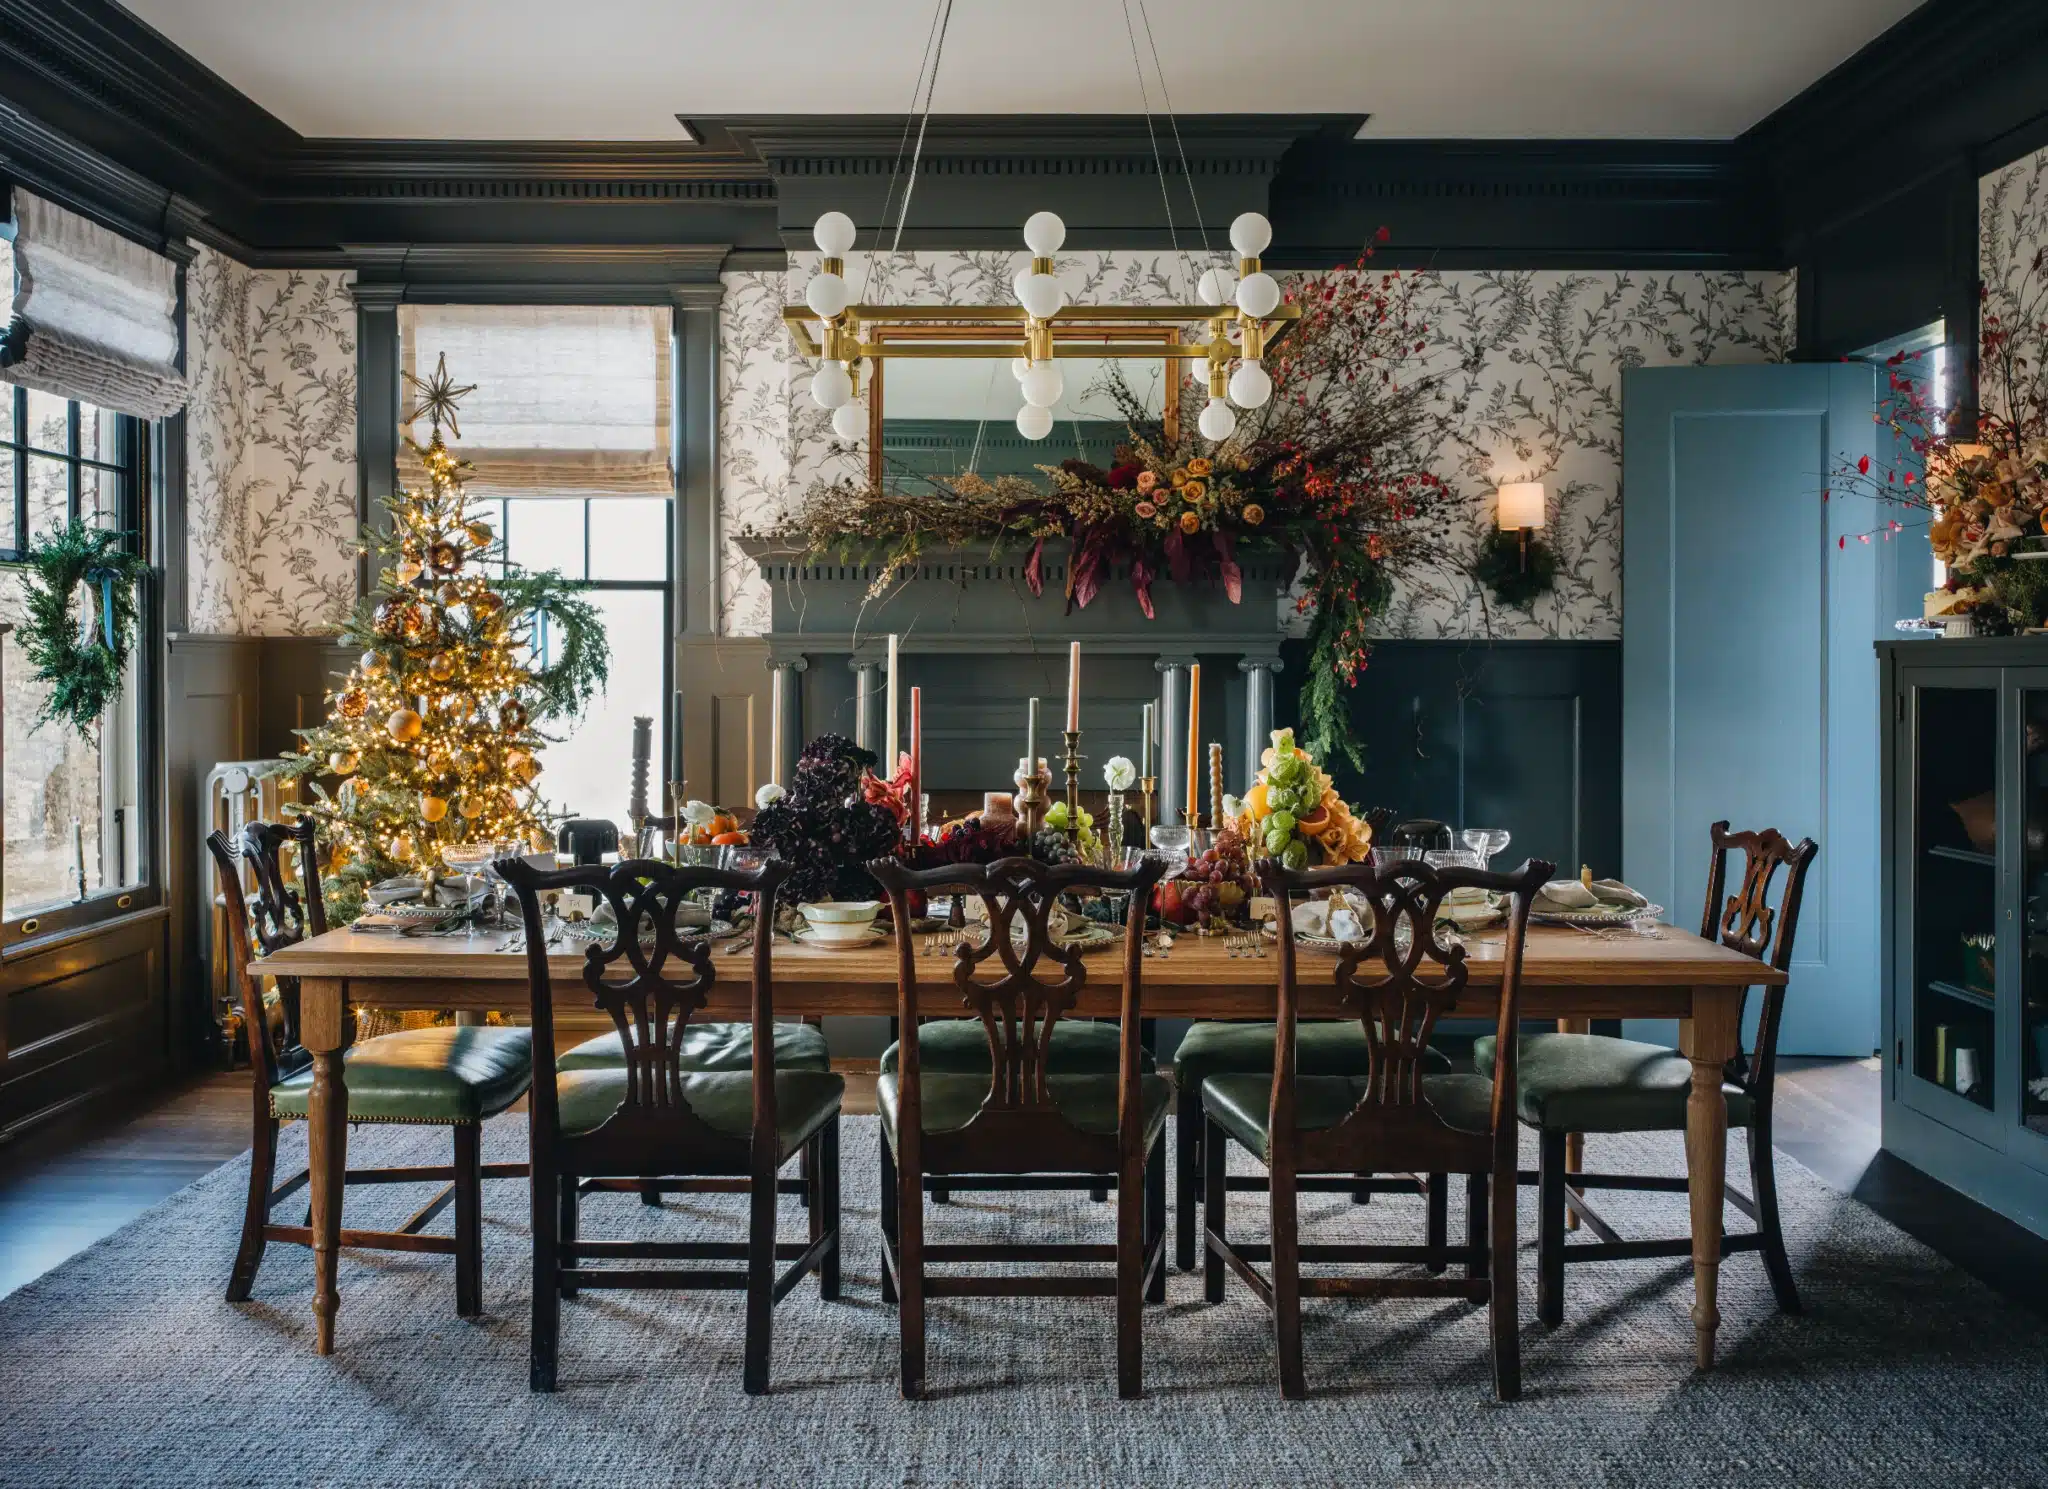  'Tis the season to be merry and bright, and nowhere is the holiday spirit more evident than in The Madison home of renowned interior designer Jean Stoffer. Stoffer PHotography Interiors